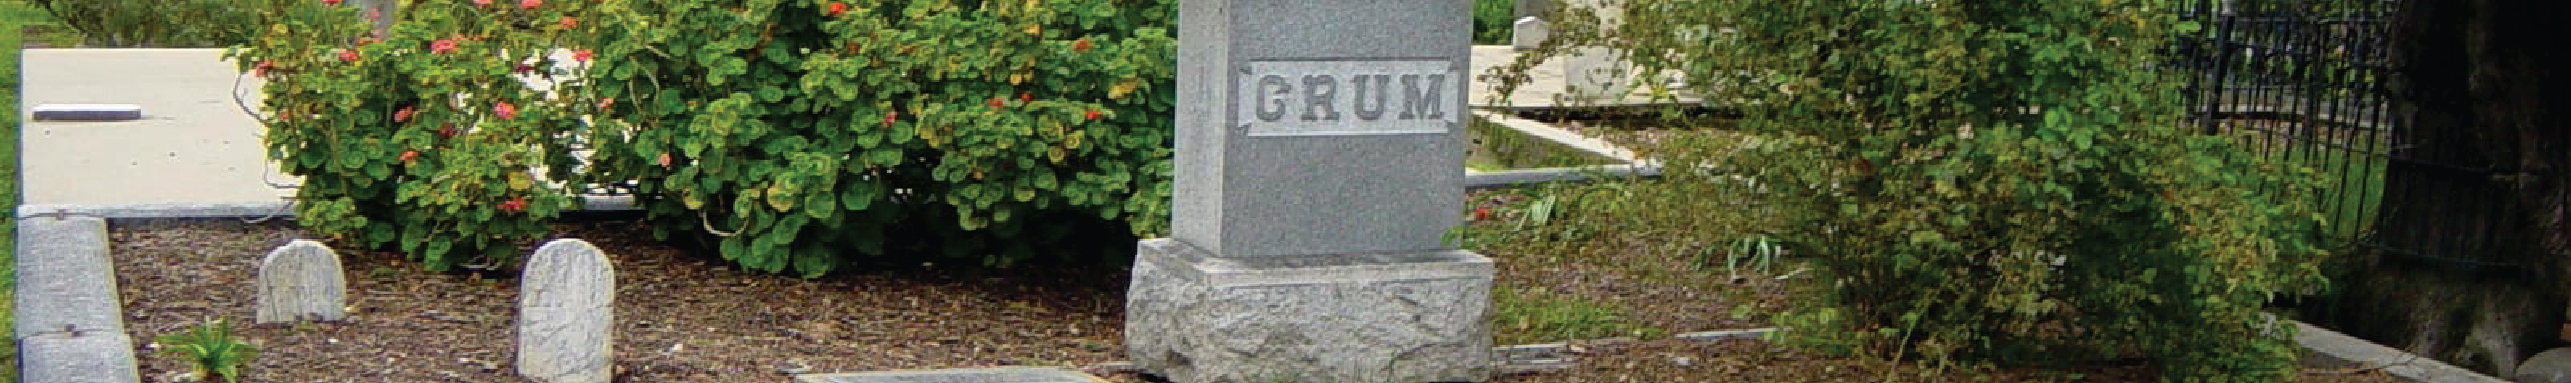 224. Grave Site, Banner.png